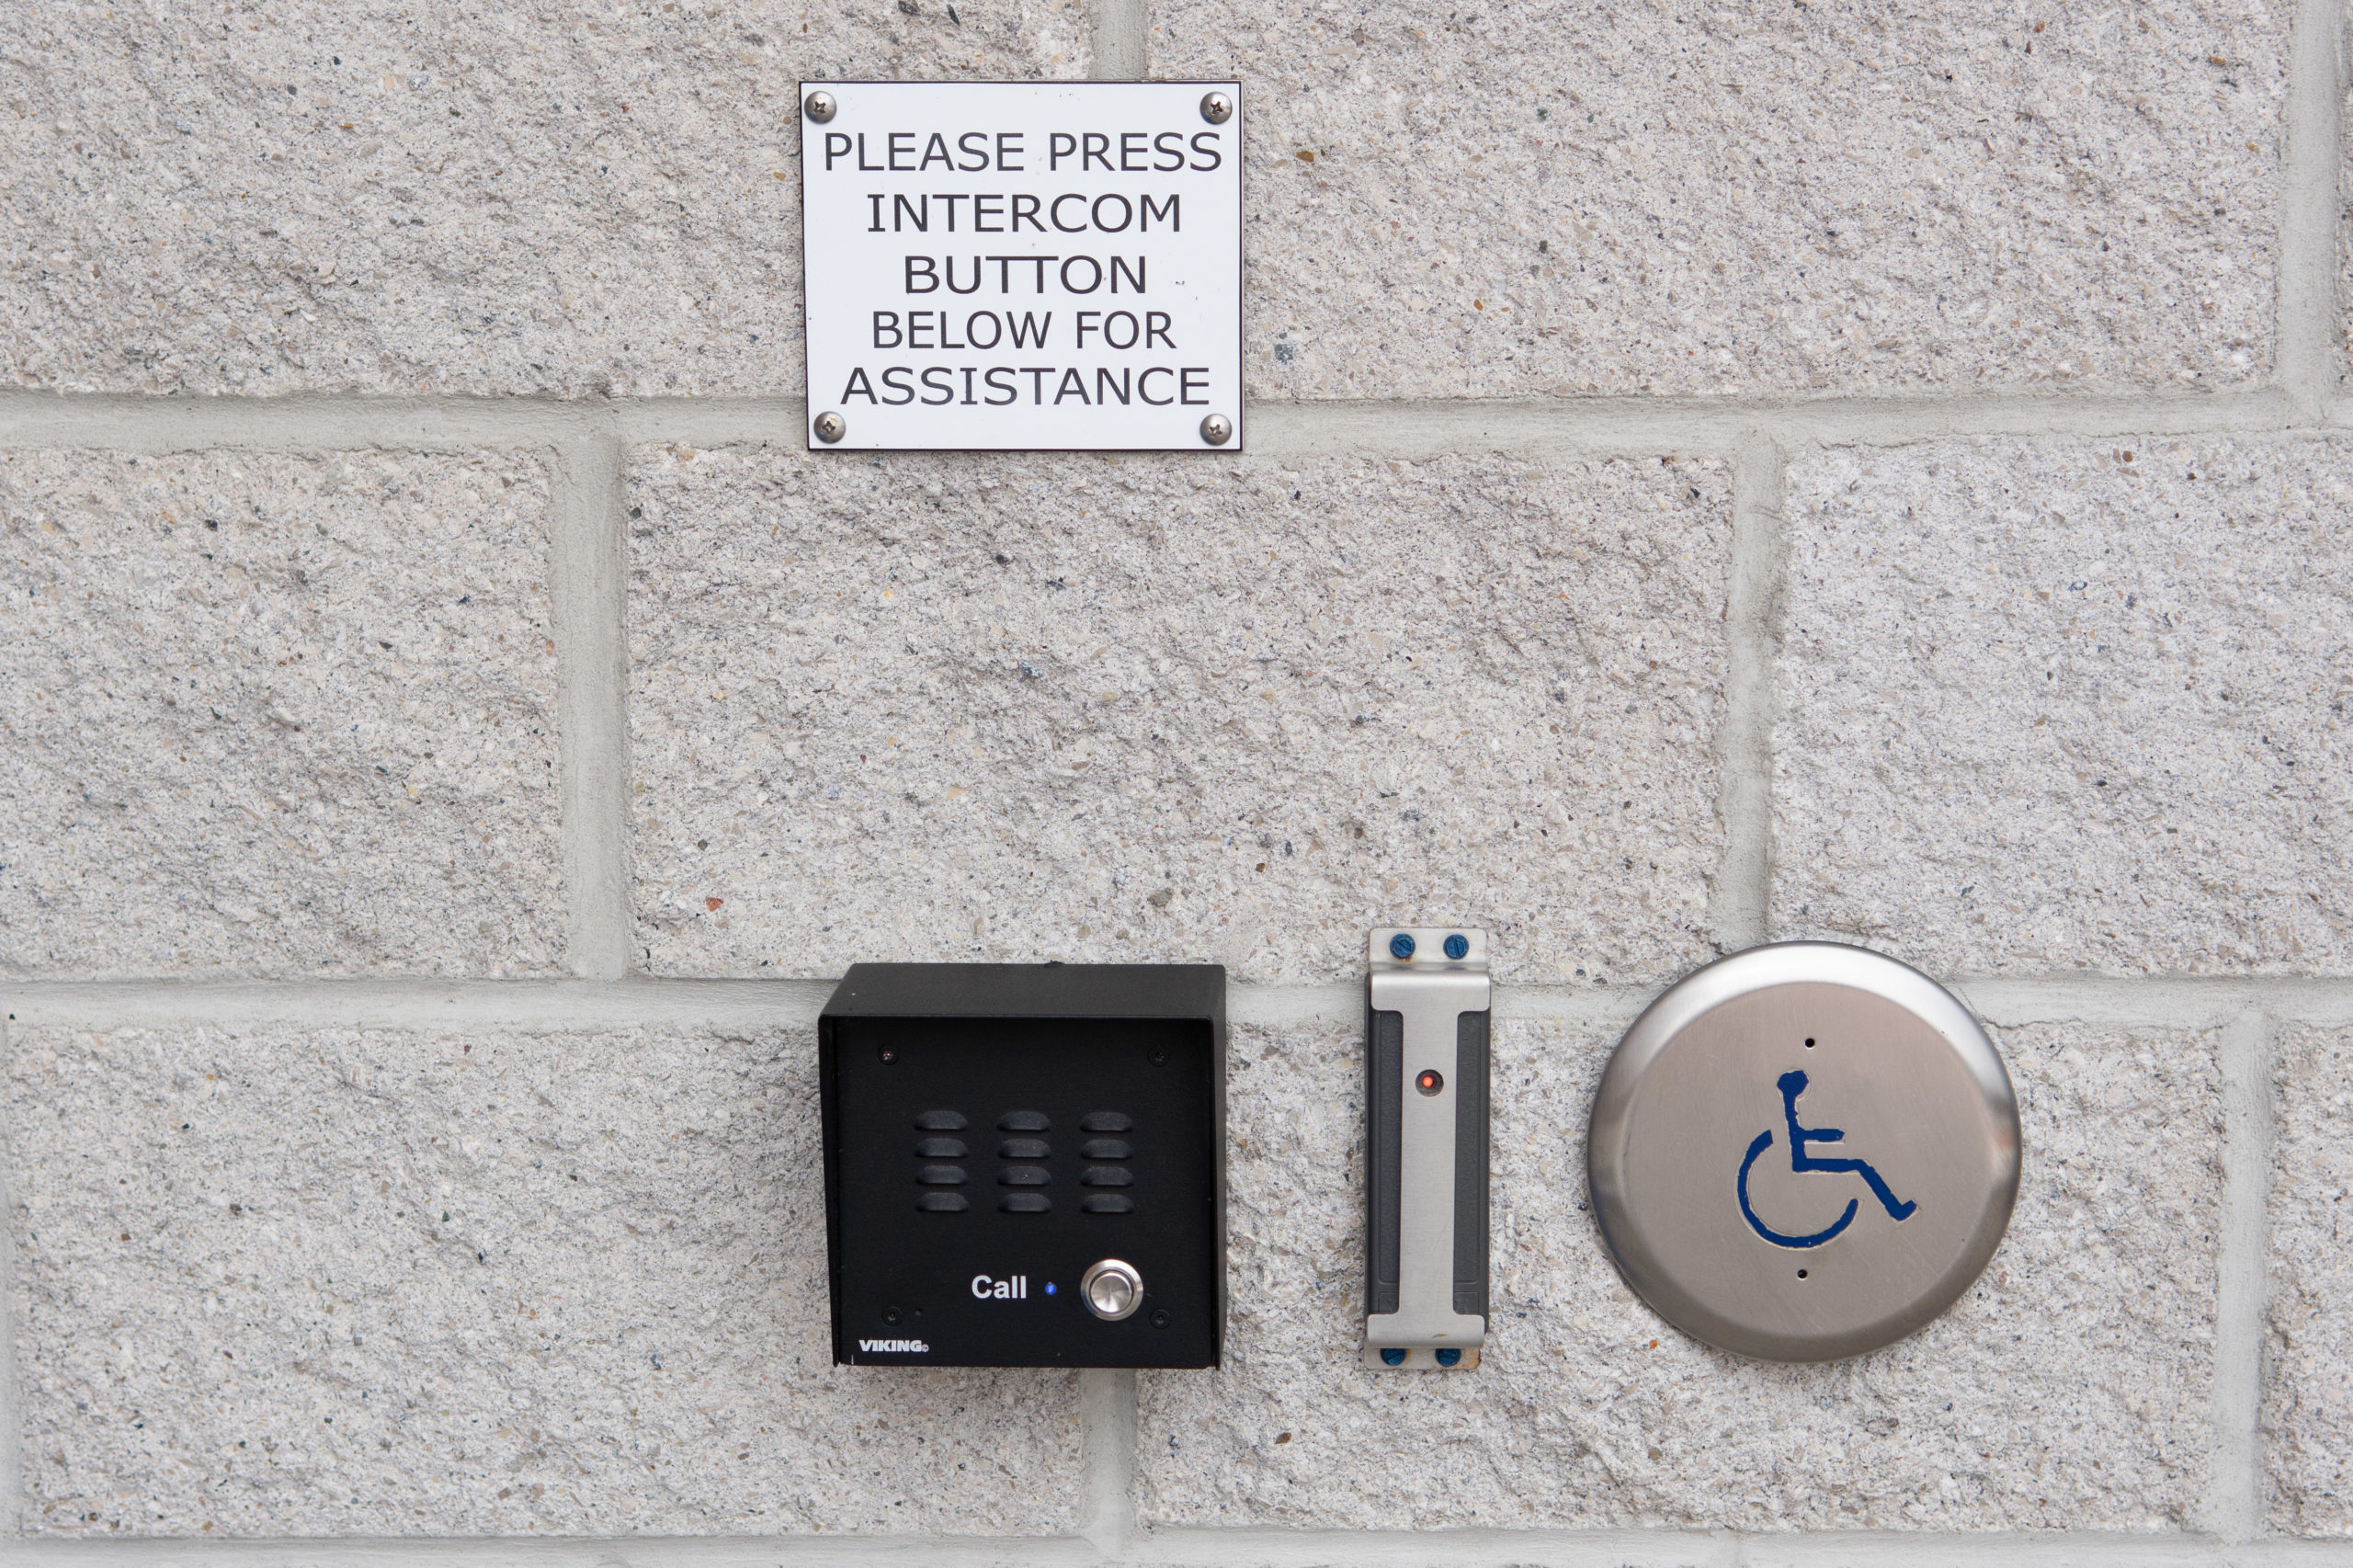 A black intercom box on a wall, beside an automatic door button with a sign above that reads "Please press intercom button below for assistance"